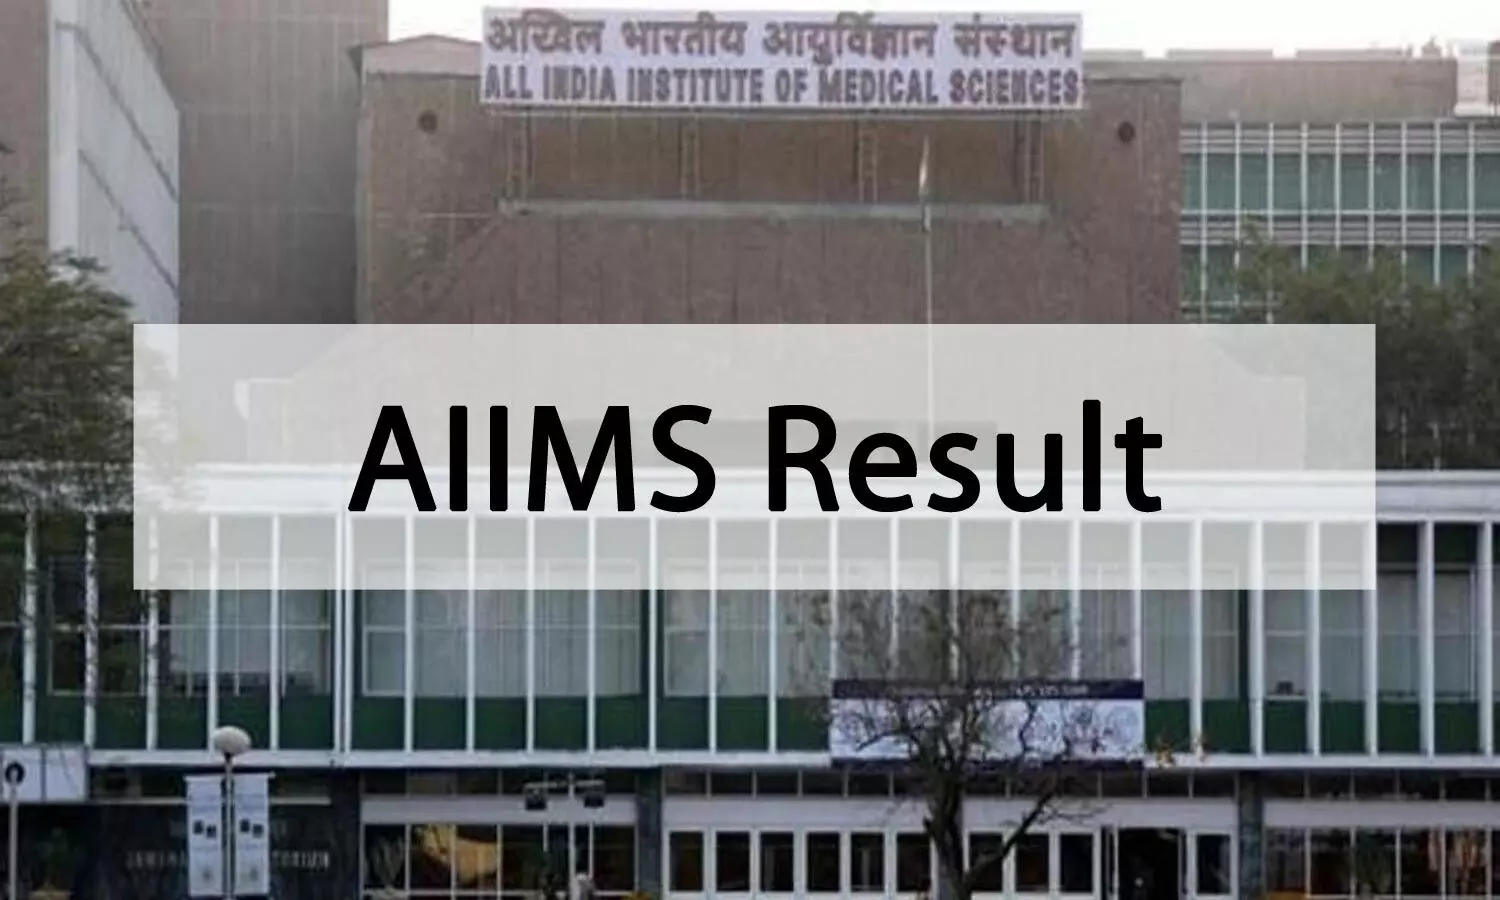 AIIMS PG 2020 July: Results declared for Open round counselling; Details